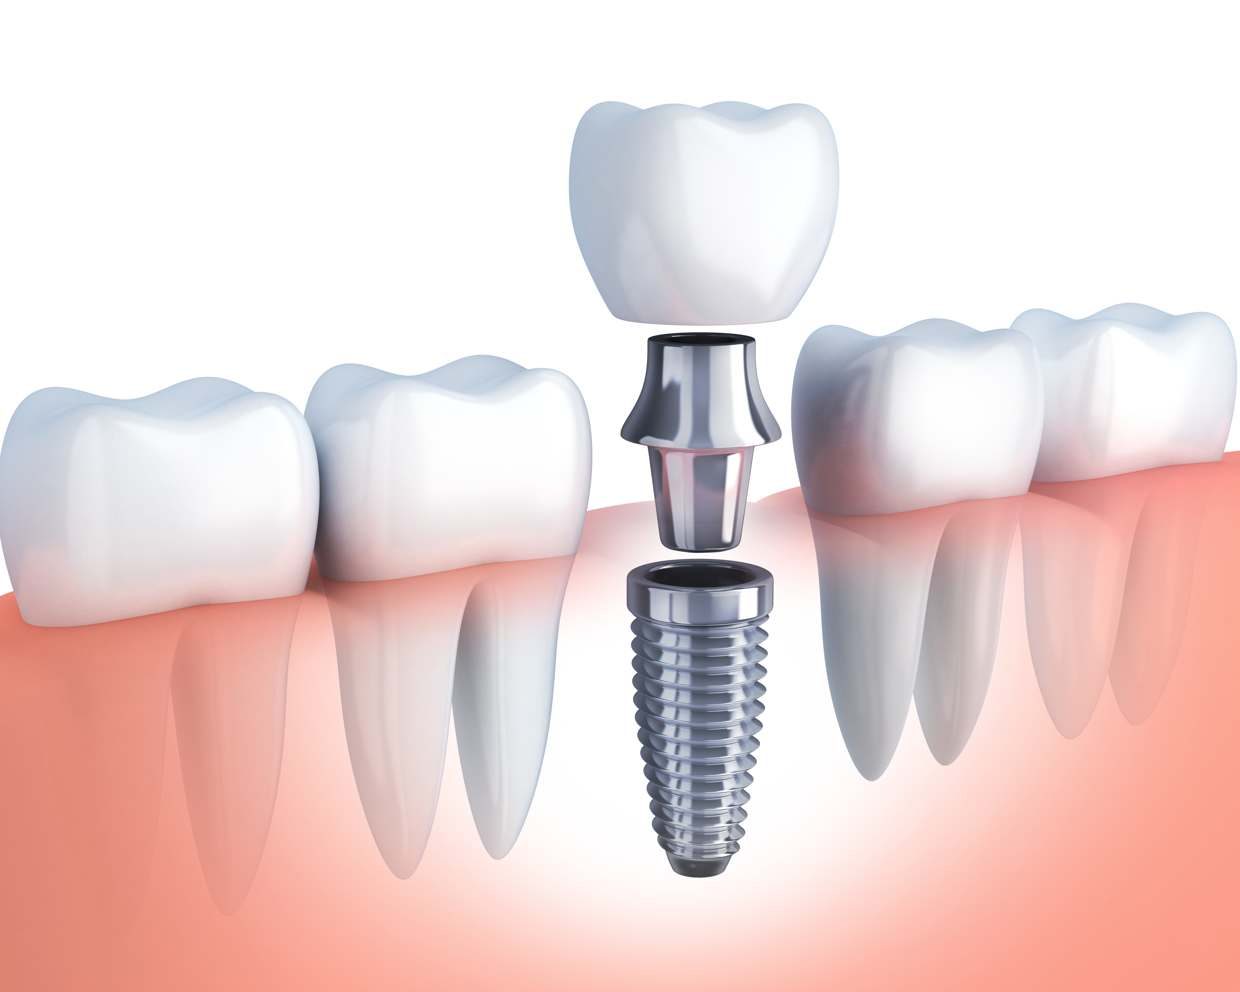 Crucial Facts That Will Help You Understand the Dental Implants